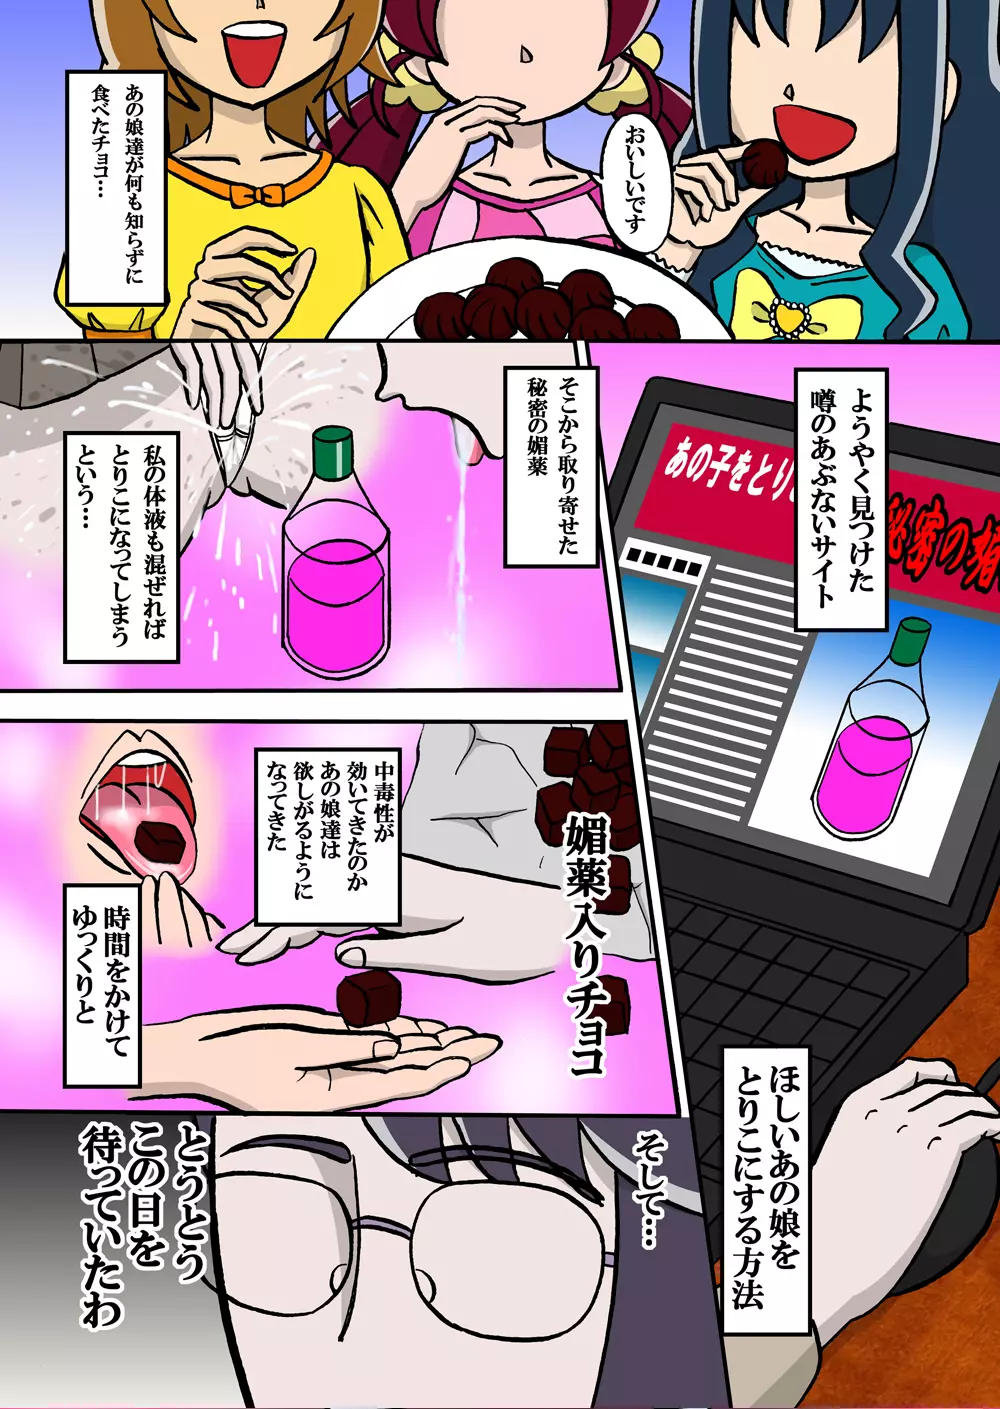 Sweetie Girls 6 ～ゆ○の変態日記～ - page3